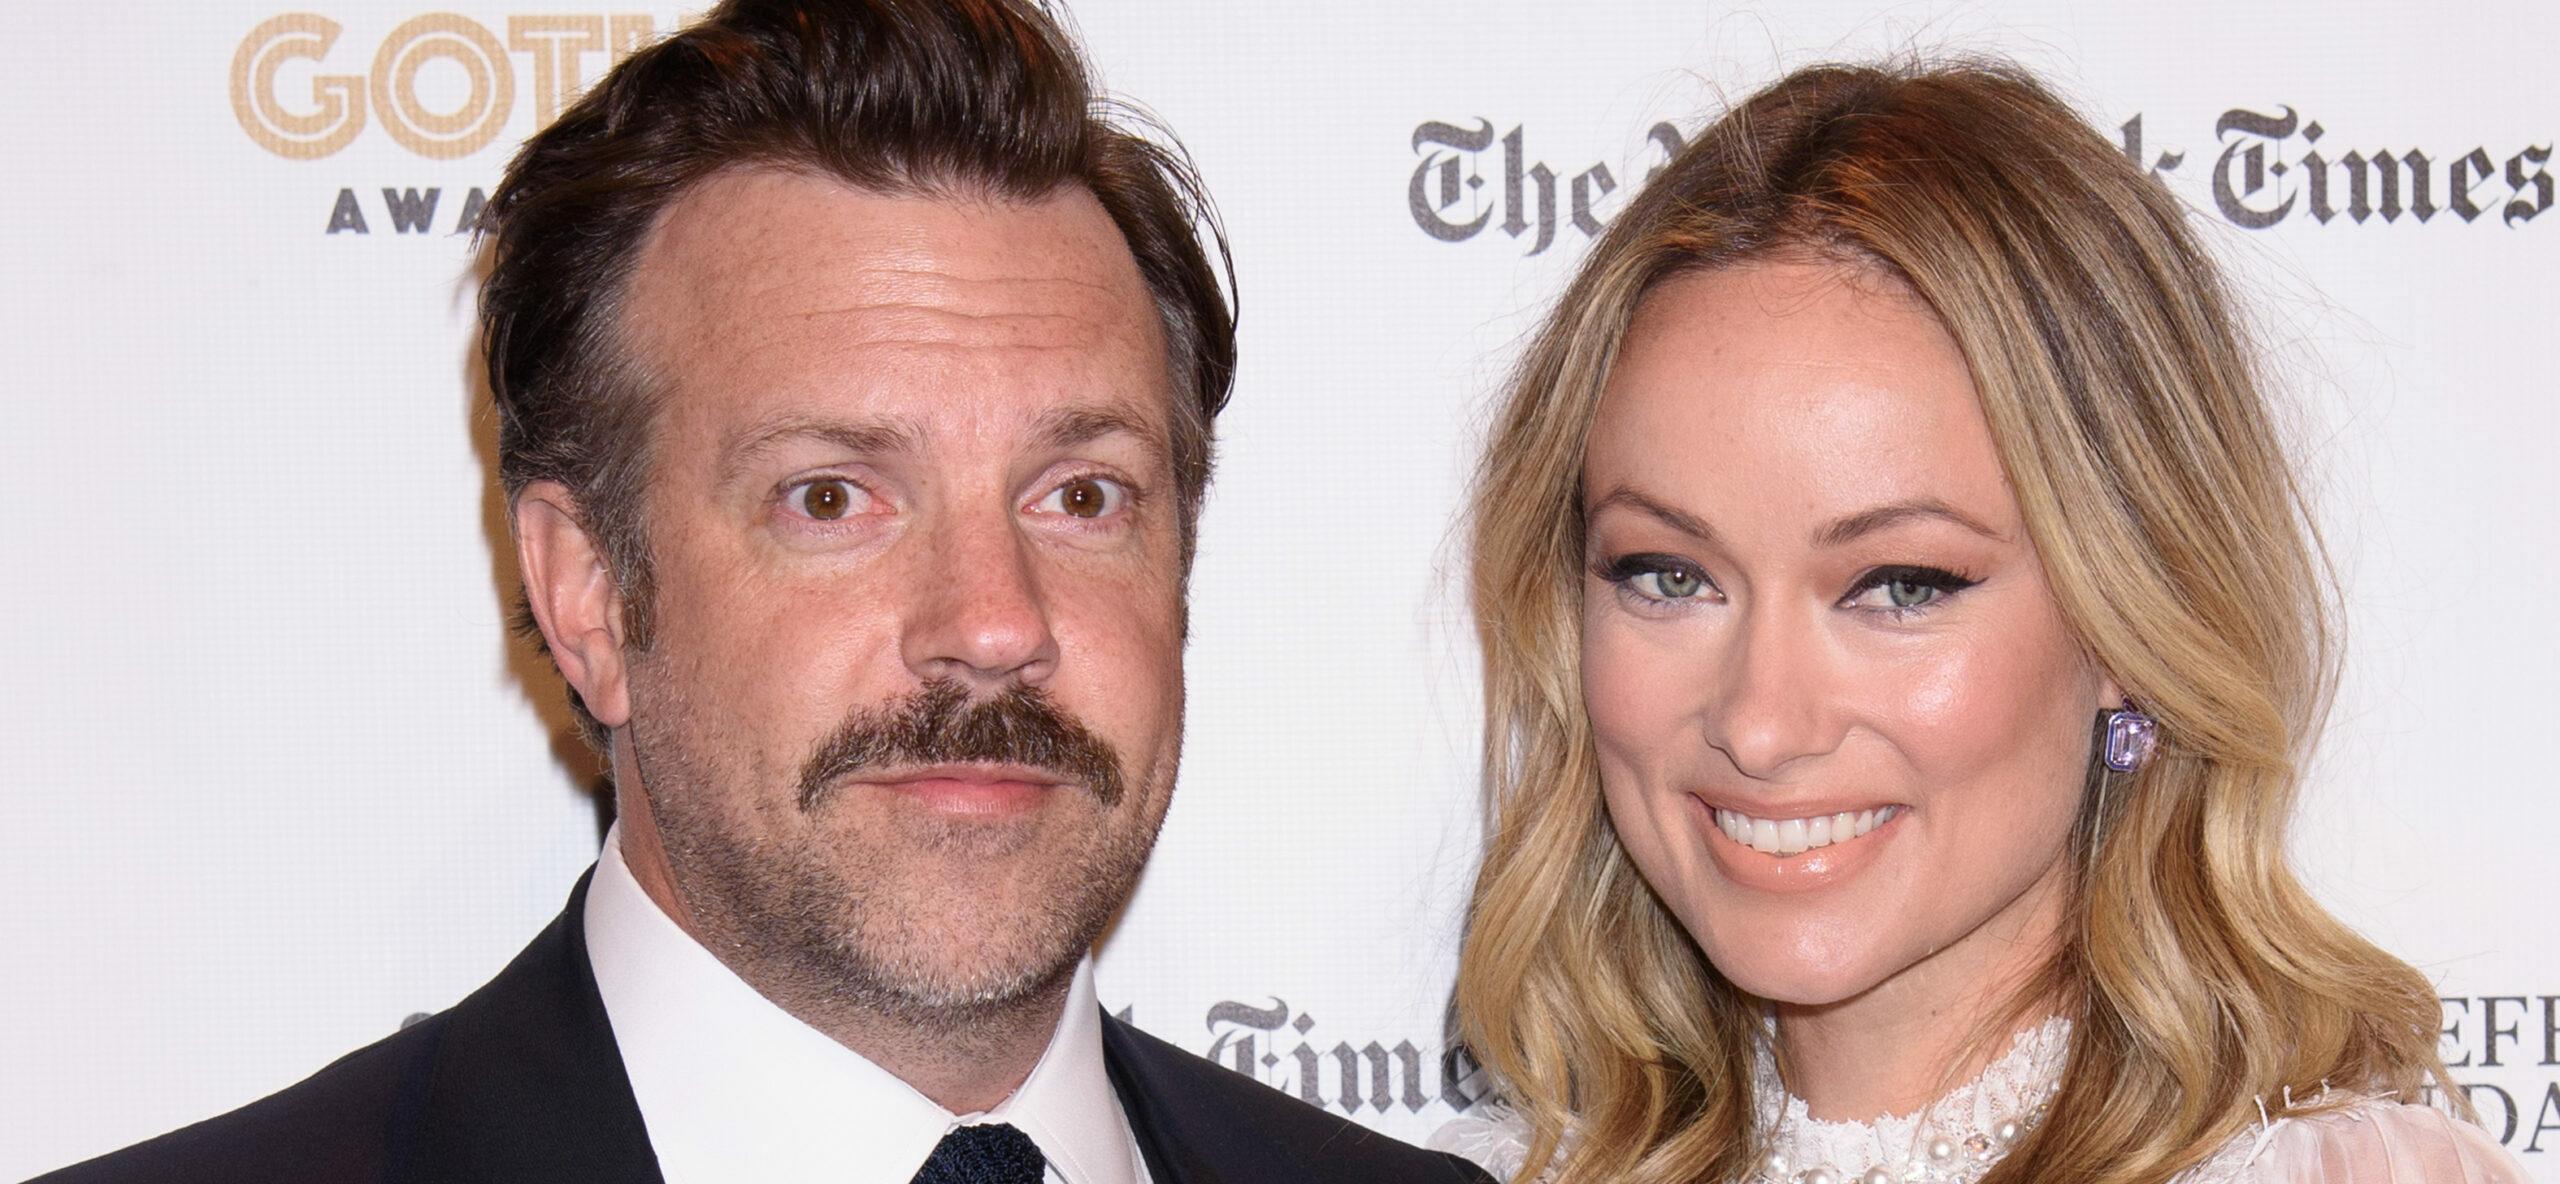 Olivia Wilde & Jason Sudeikis Join Forces To BASH Nanny, She’s Lying About Us!